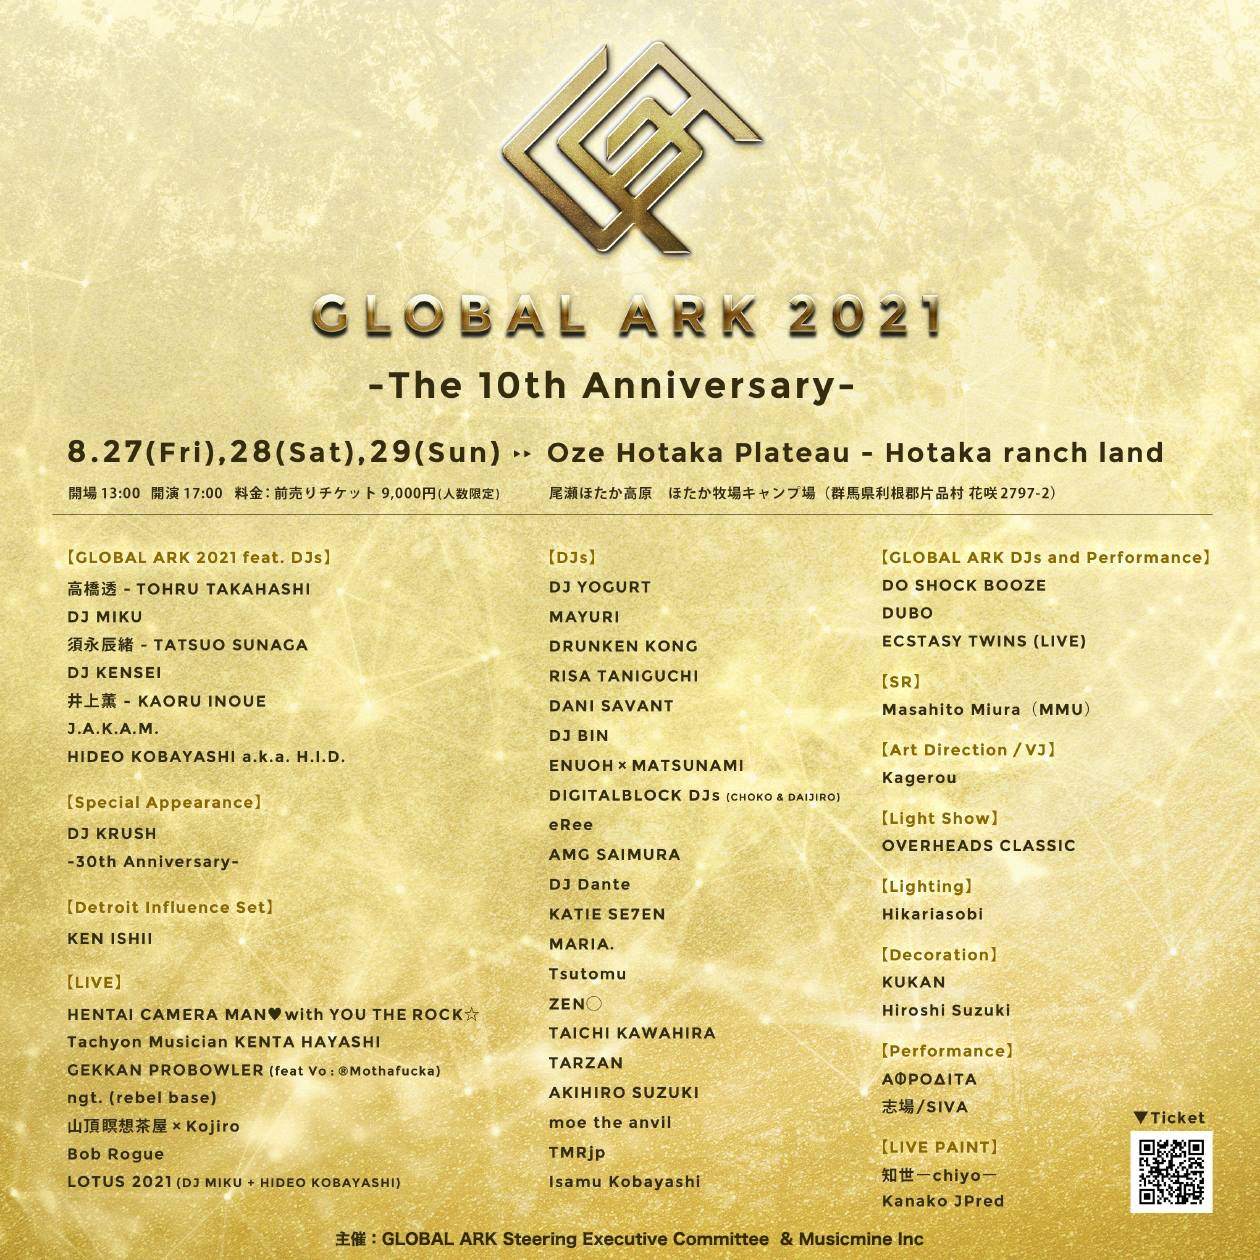 GLOBAL ARK 2021 -The 10th Anniversary in OZE - - Página trasera